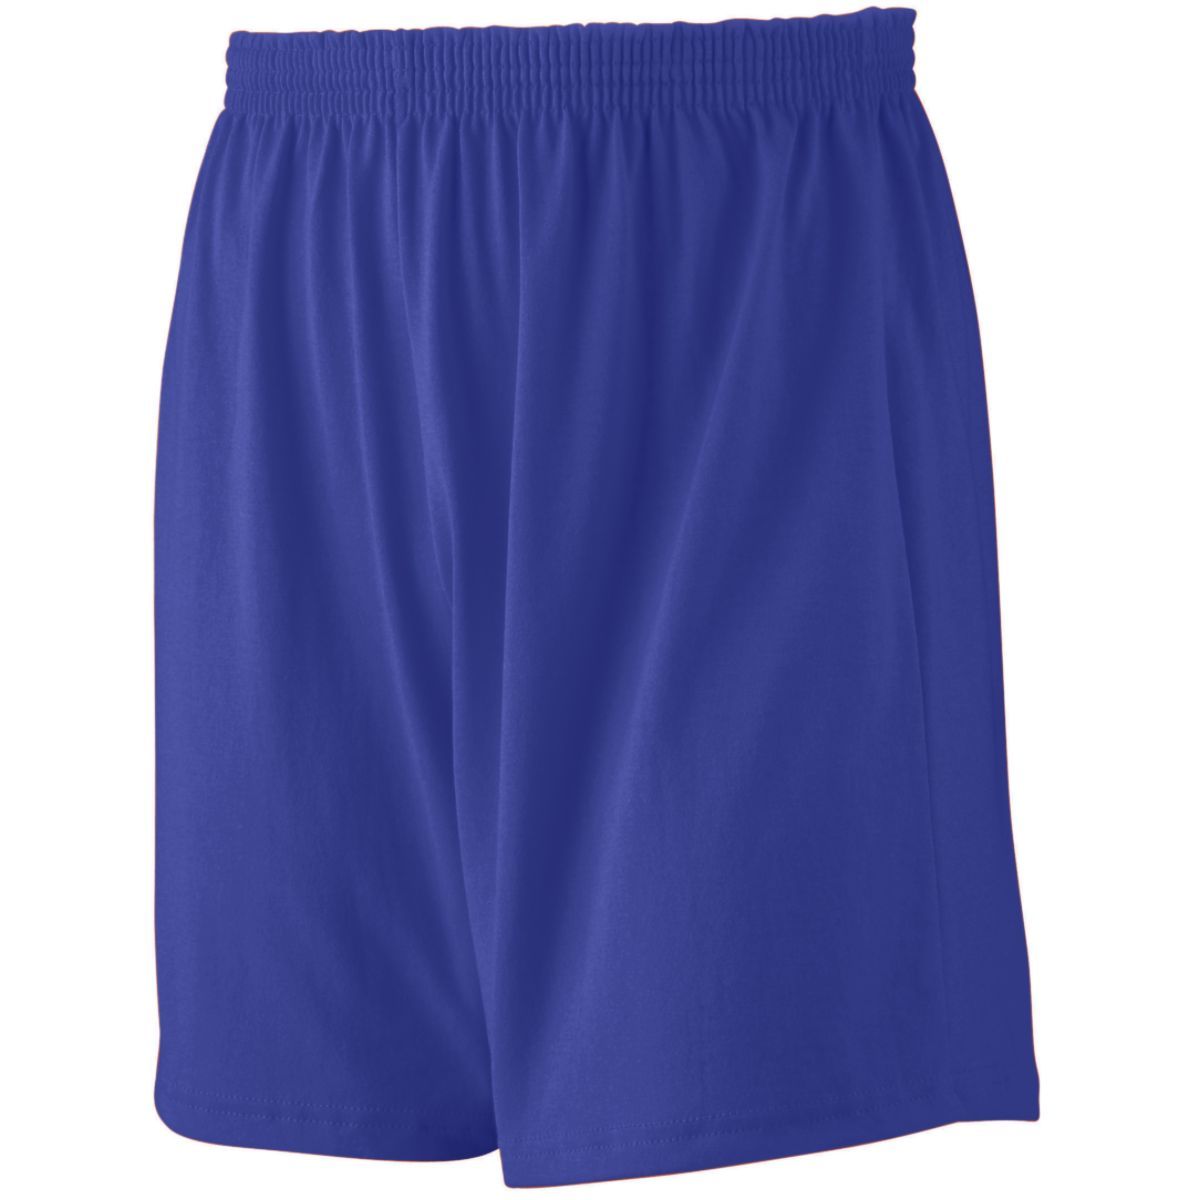 Augusta Sportswear Youth Jersey Knit Shorts in Purple  -Part of the Youth, Youth-Shorts, Augusta-Products product lines at KanaleyCreations.com